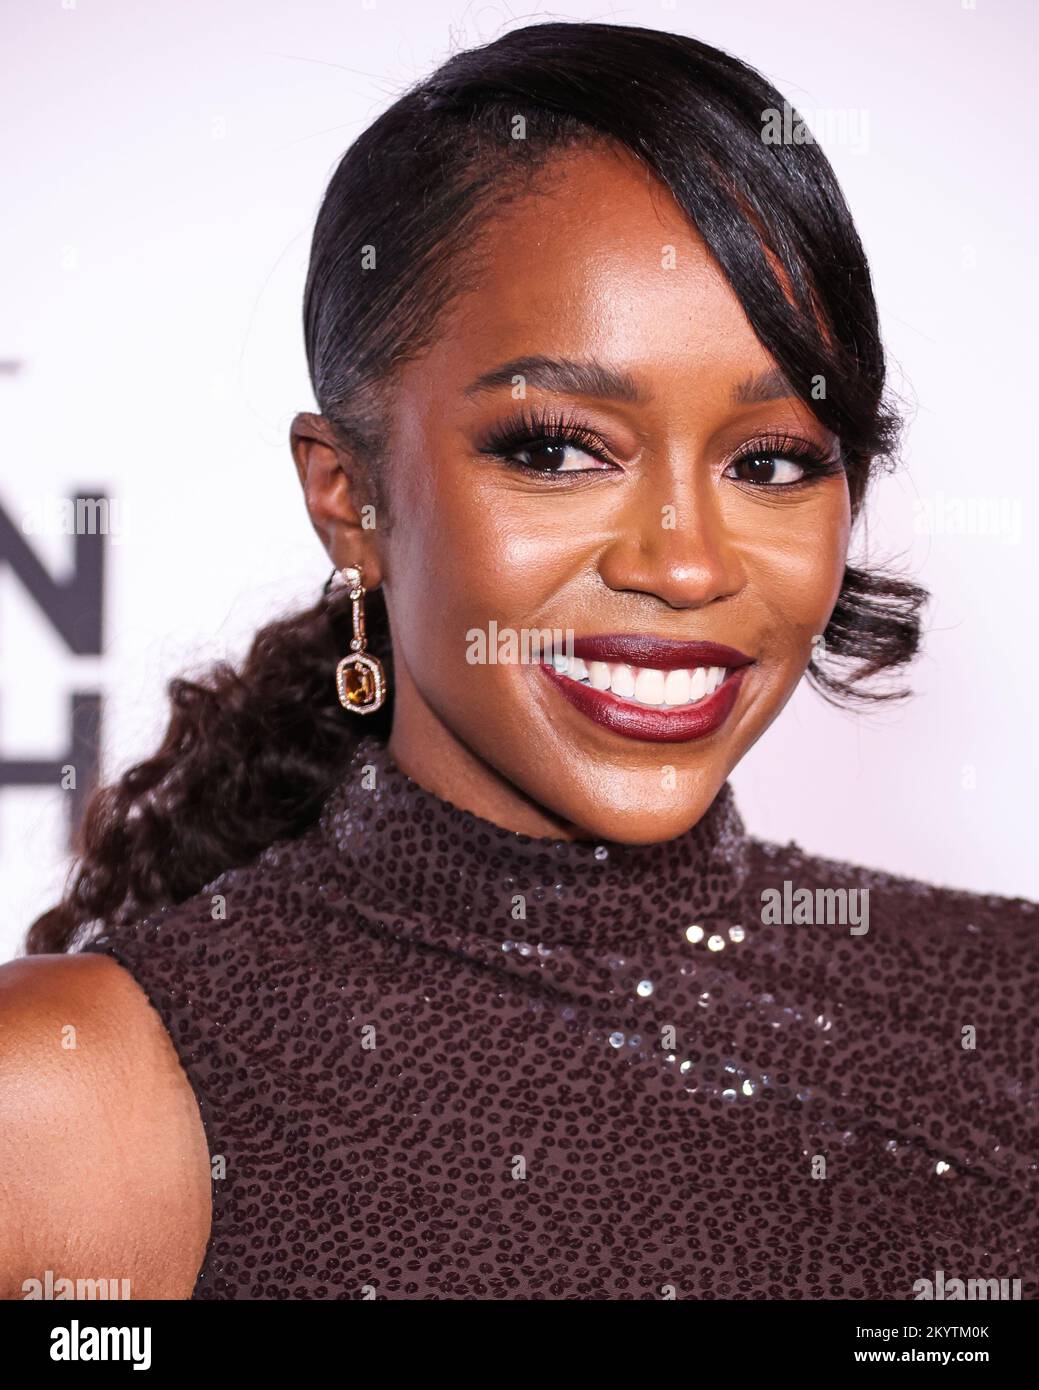 LOS ANGELES, CALIFORNIA, USA - DECEMBER 01: American actress Aja Naomi King arrives at the L'Oreal Paris' Women Of Worth Celebration 2022 held at The Ebell of Los Angeles on December 1, 2022 in Los Angeles, California, United States. (Photo by Xavier Collin/Image Press Agency) Stock Photo